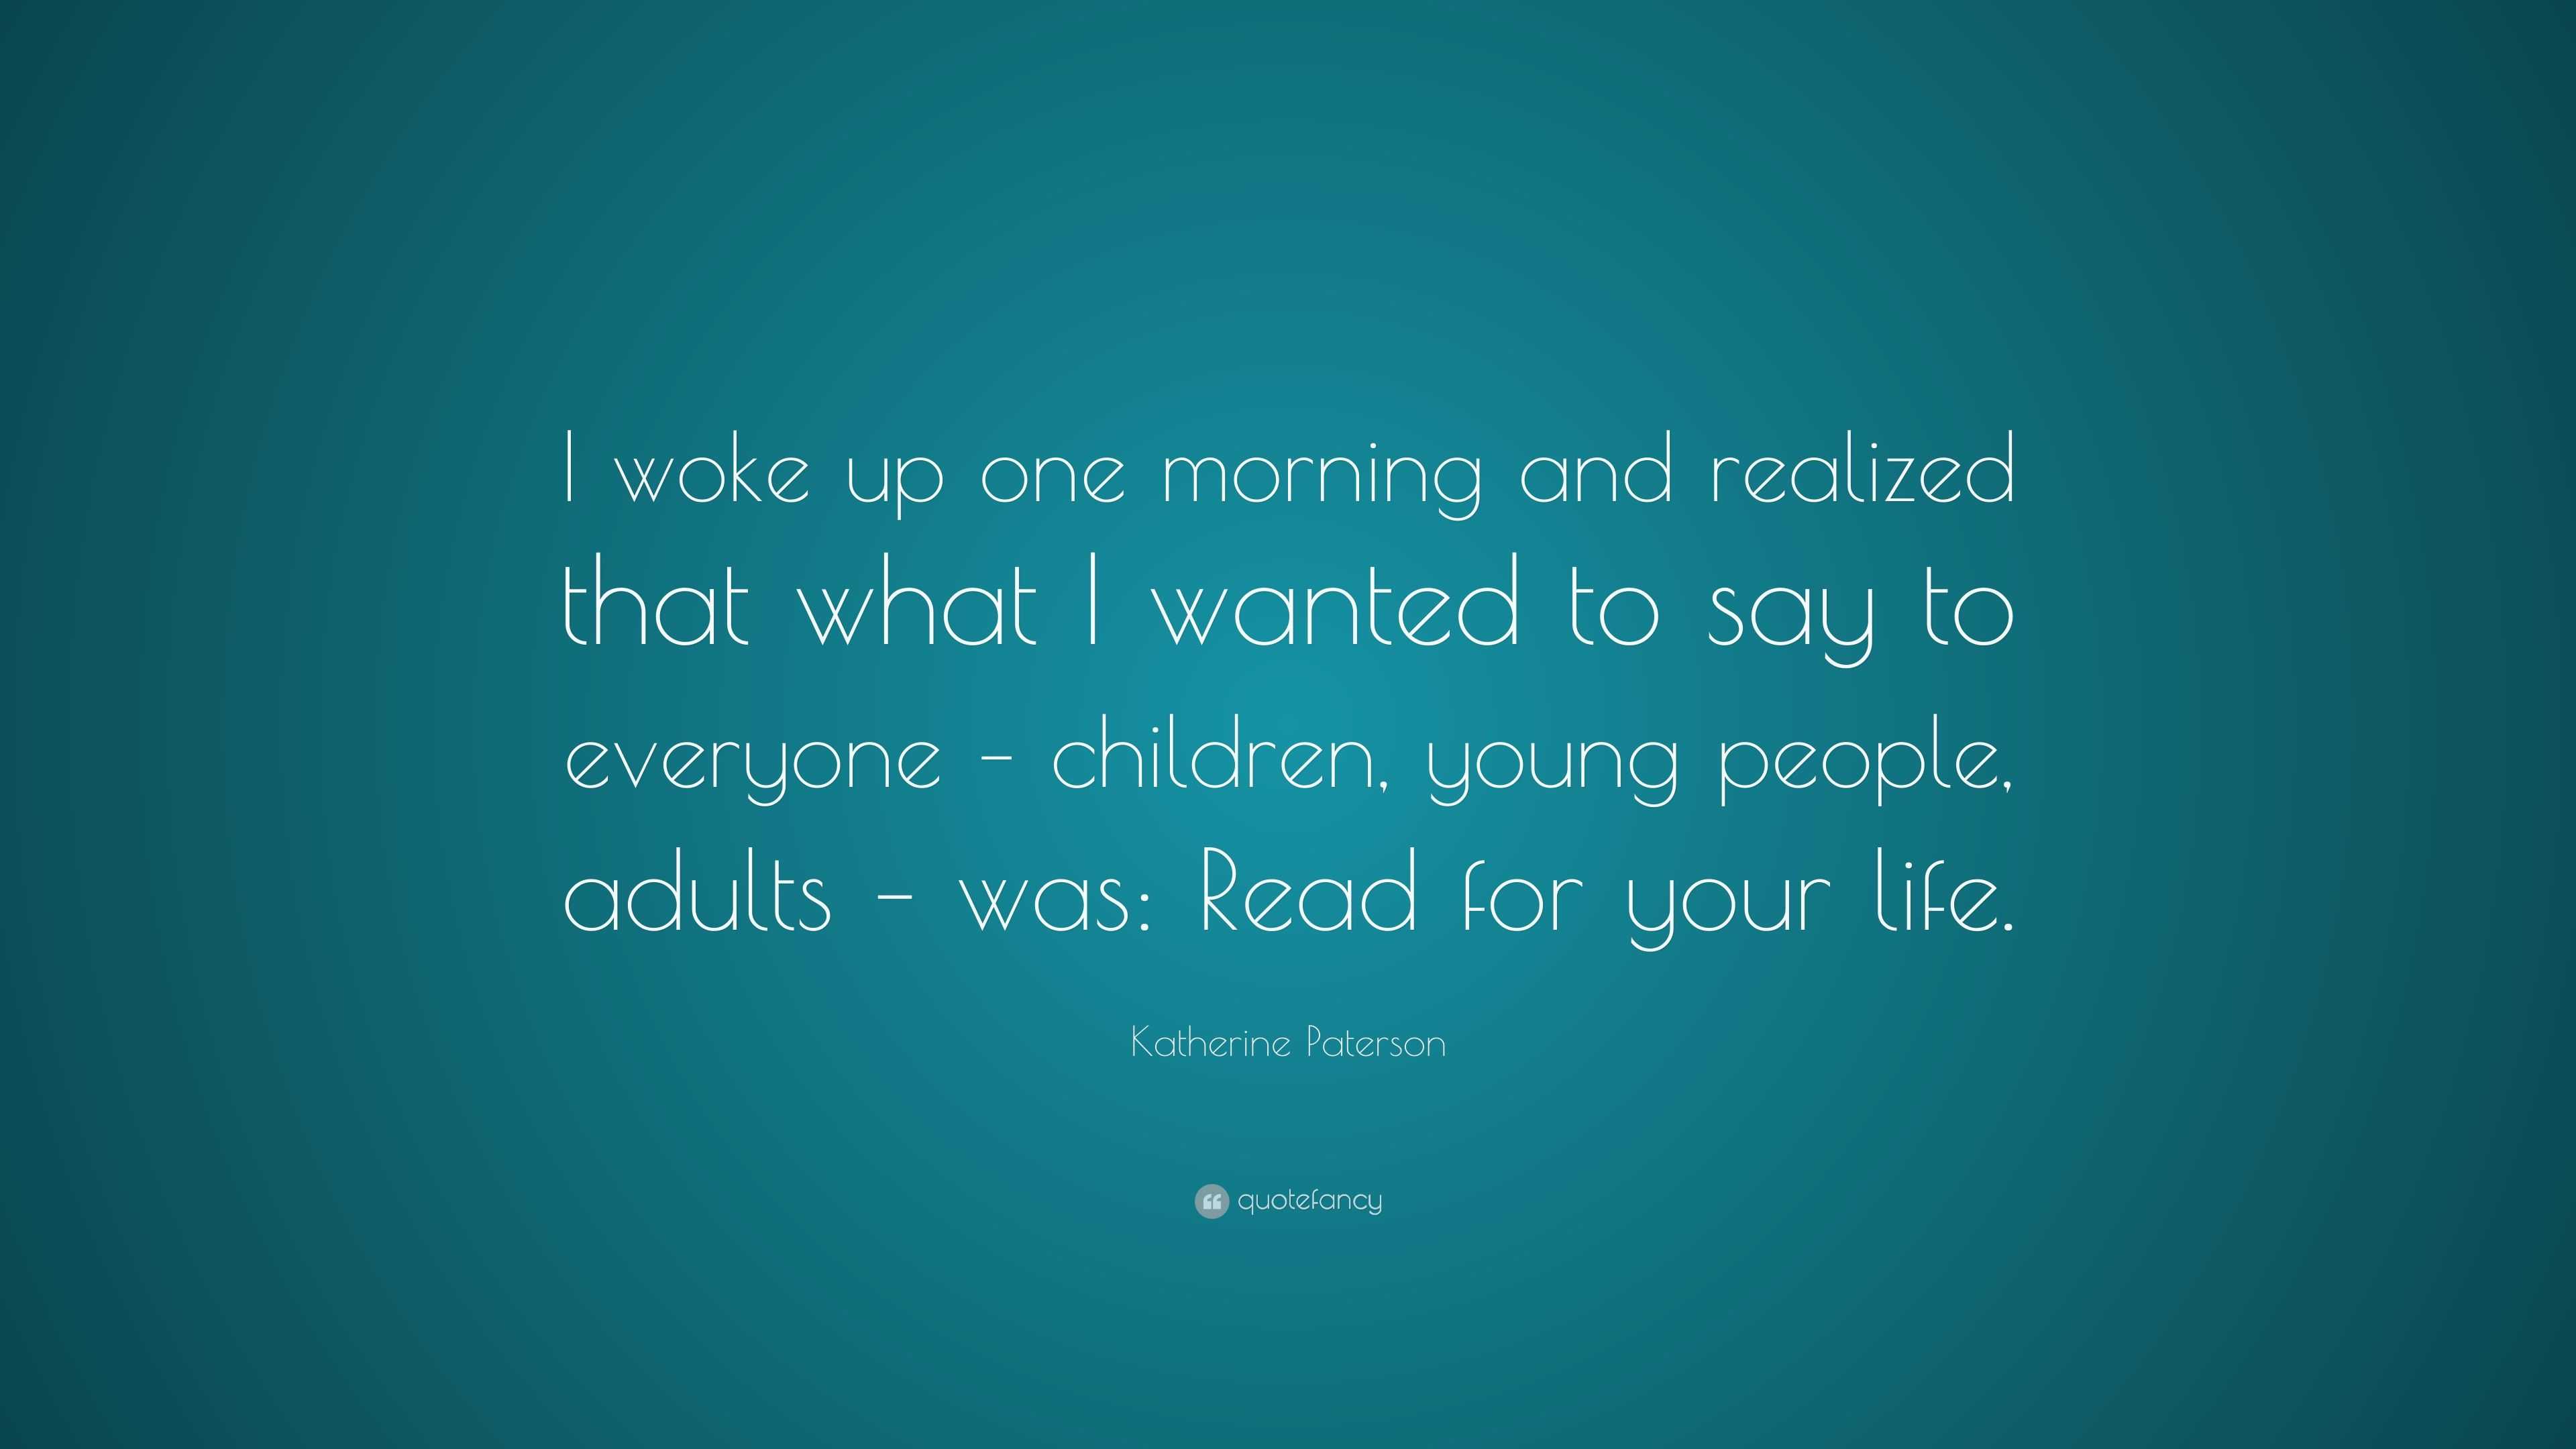 Katherine Paterson Quote: “I woke up one morning and realized that what ...